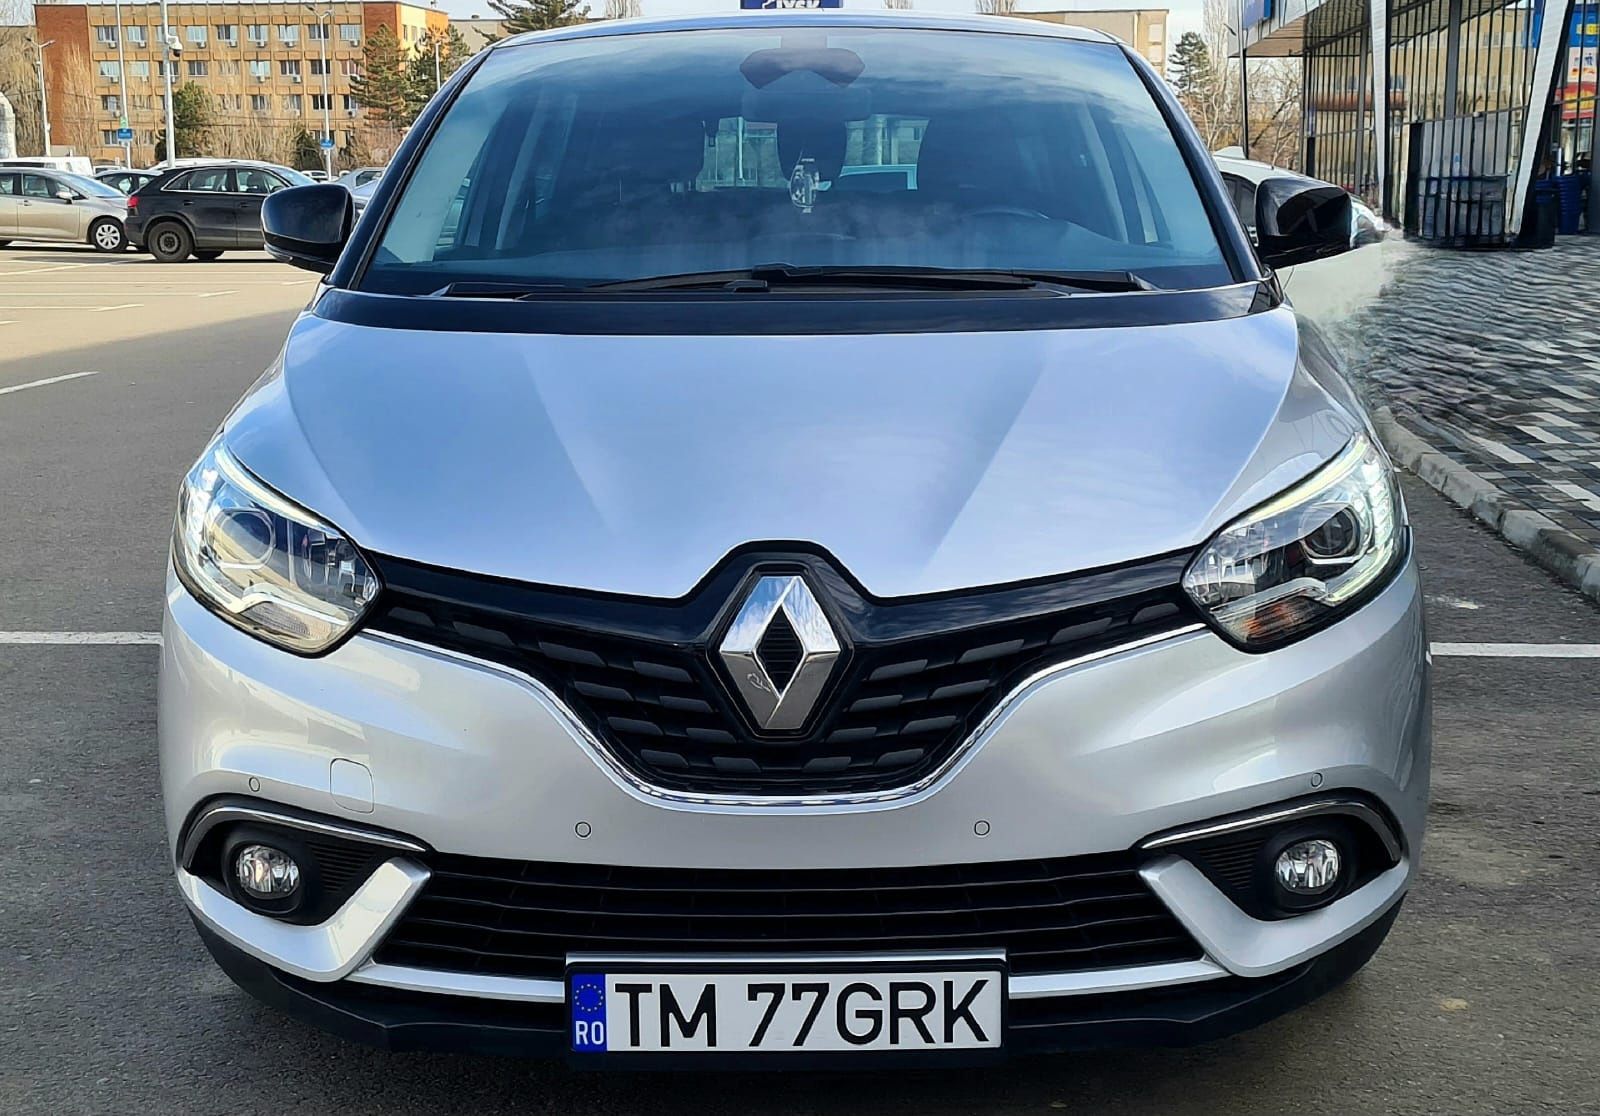 Renault Scenic Automatic An Model 2020